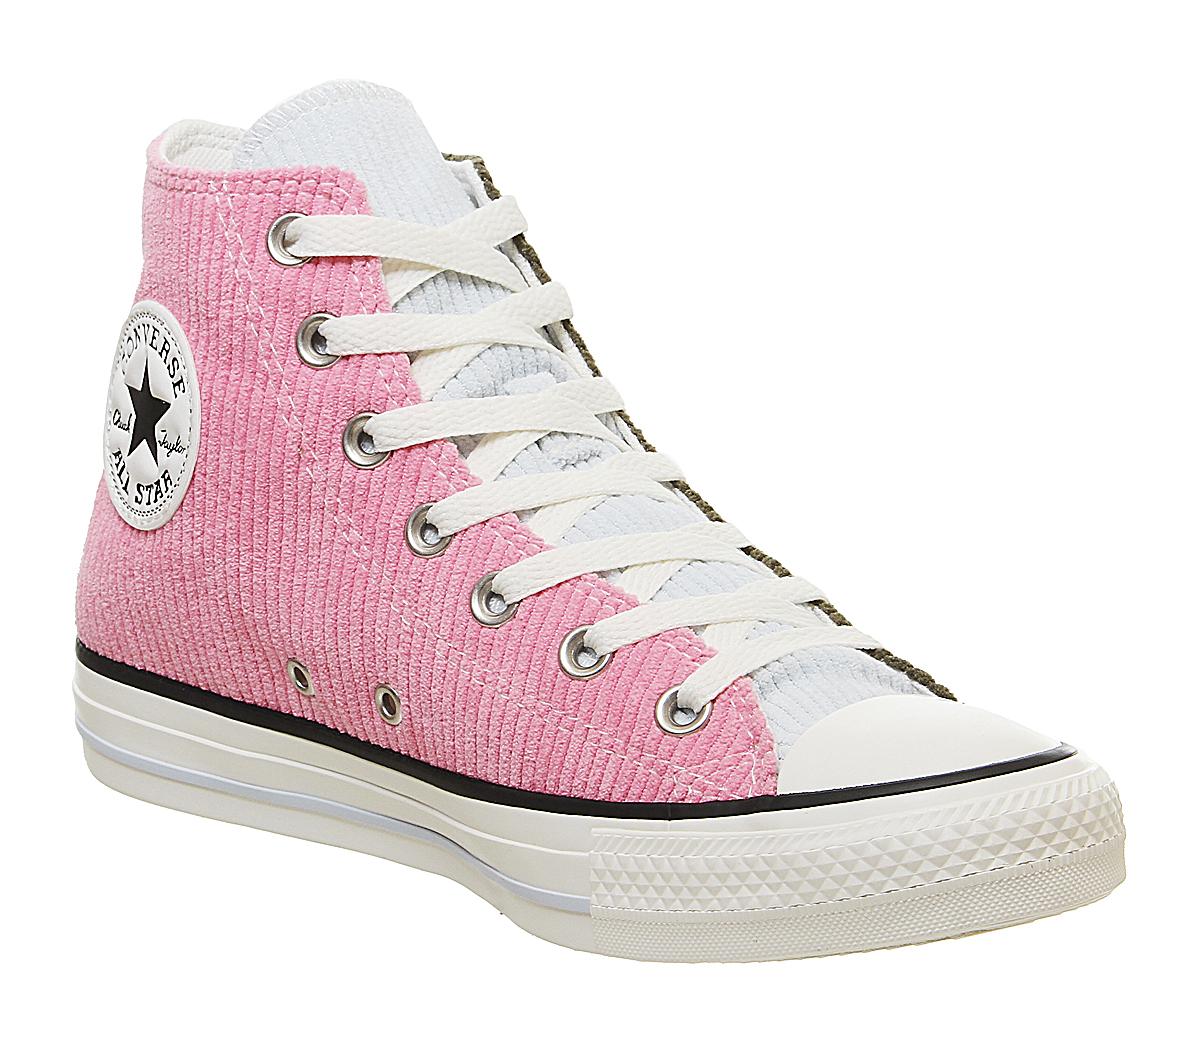 Converse Converse All Star Hi Trainers Corduroy Herbal Pink Egret Exclusive  - Unisex Sports